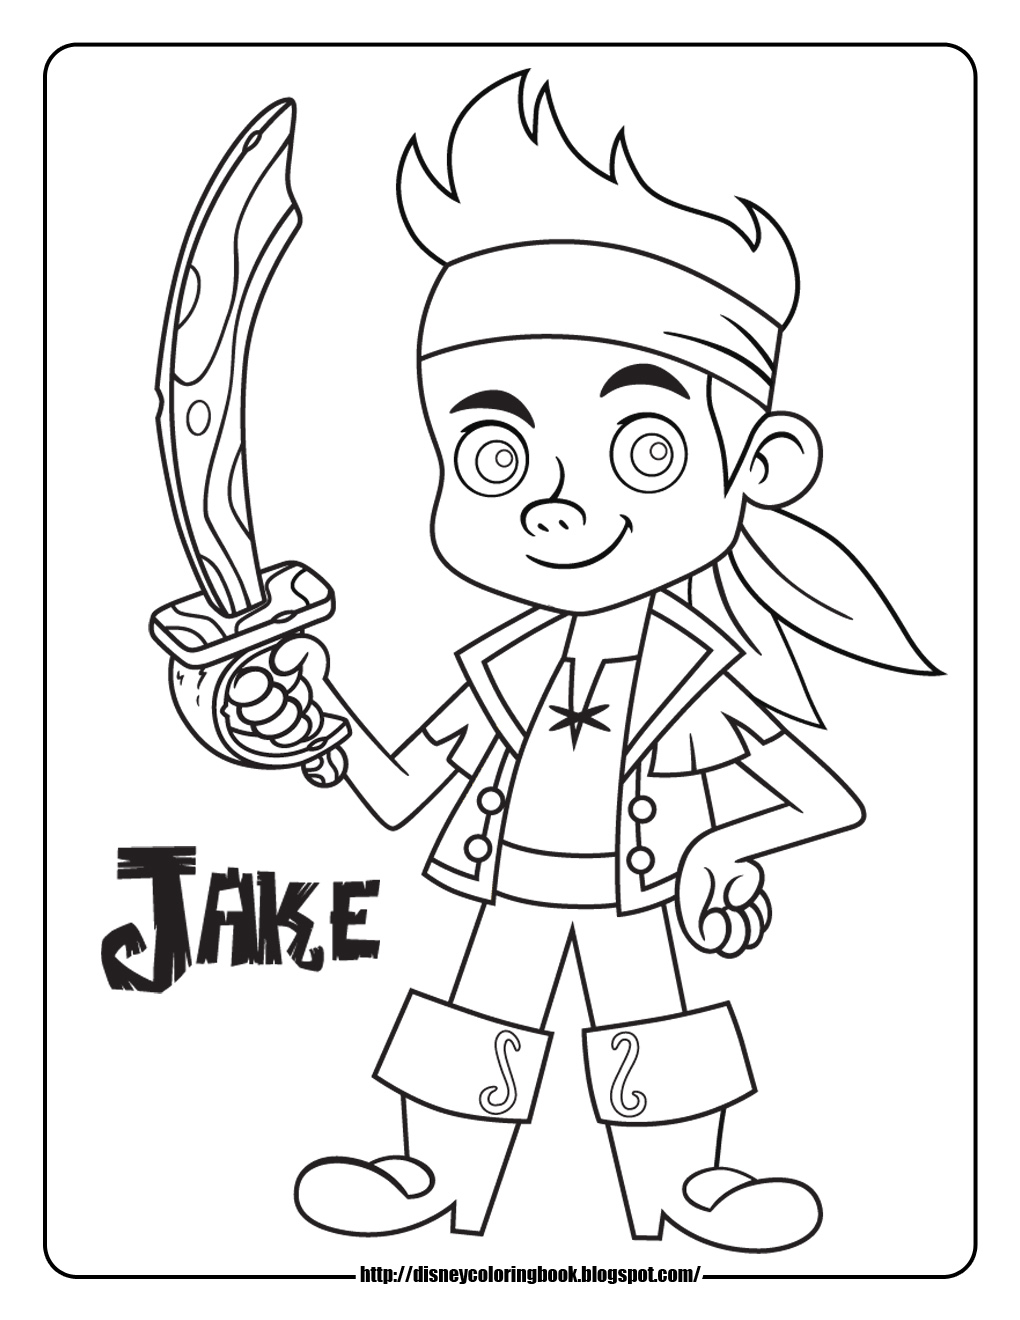 Download Jake and the Neverland Pirates 1: Free Disney Coloring ...